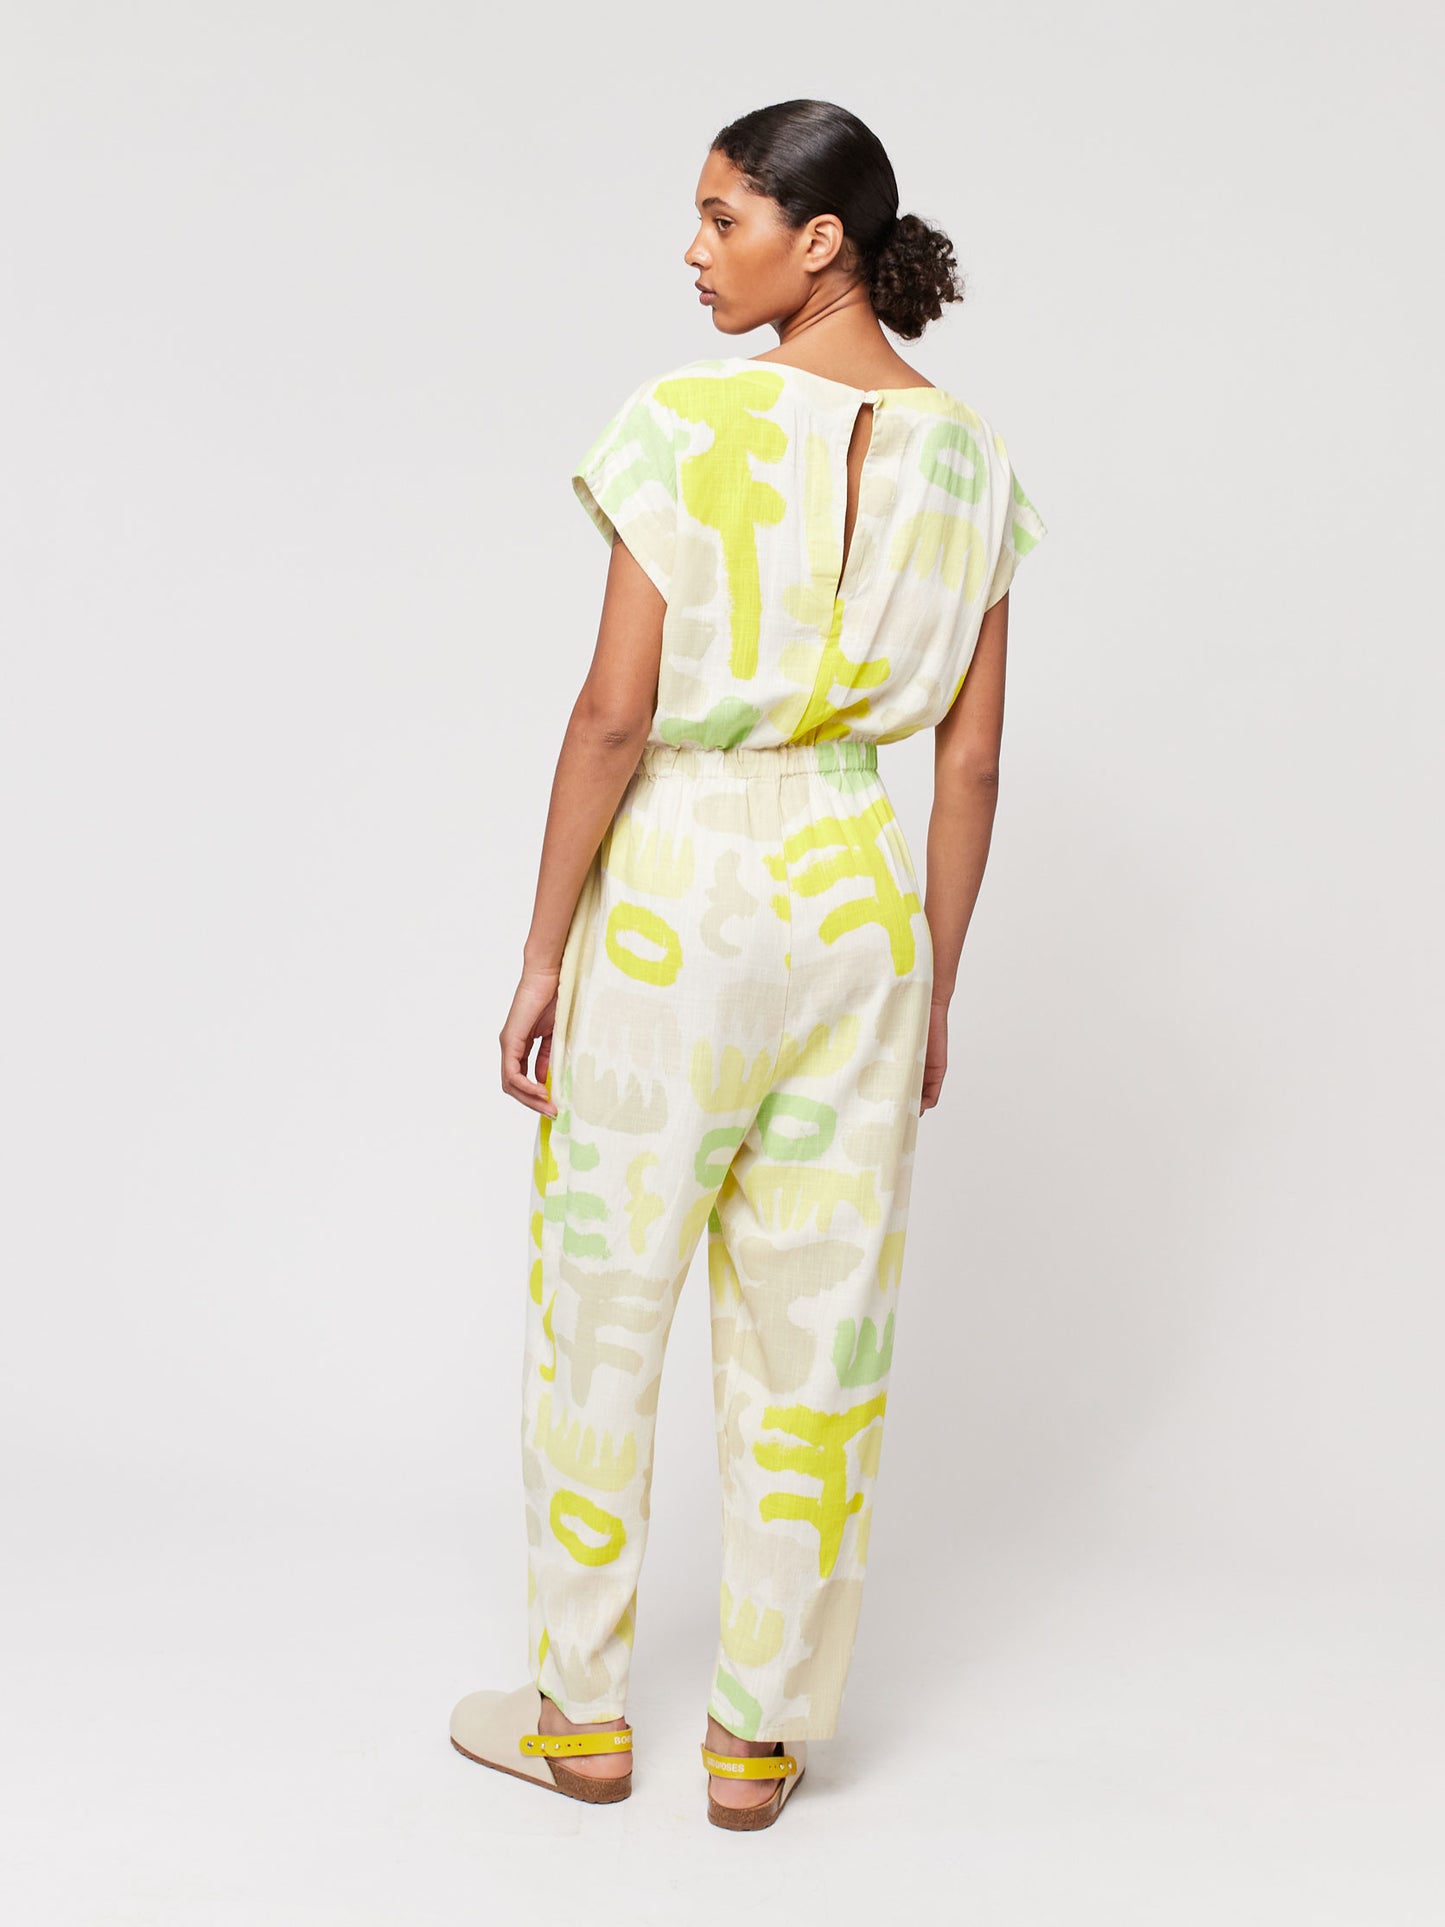 Carnival print overall